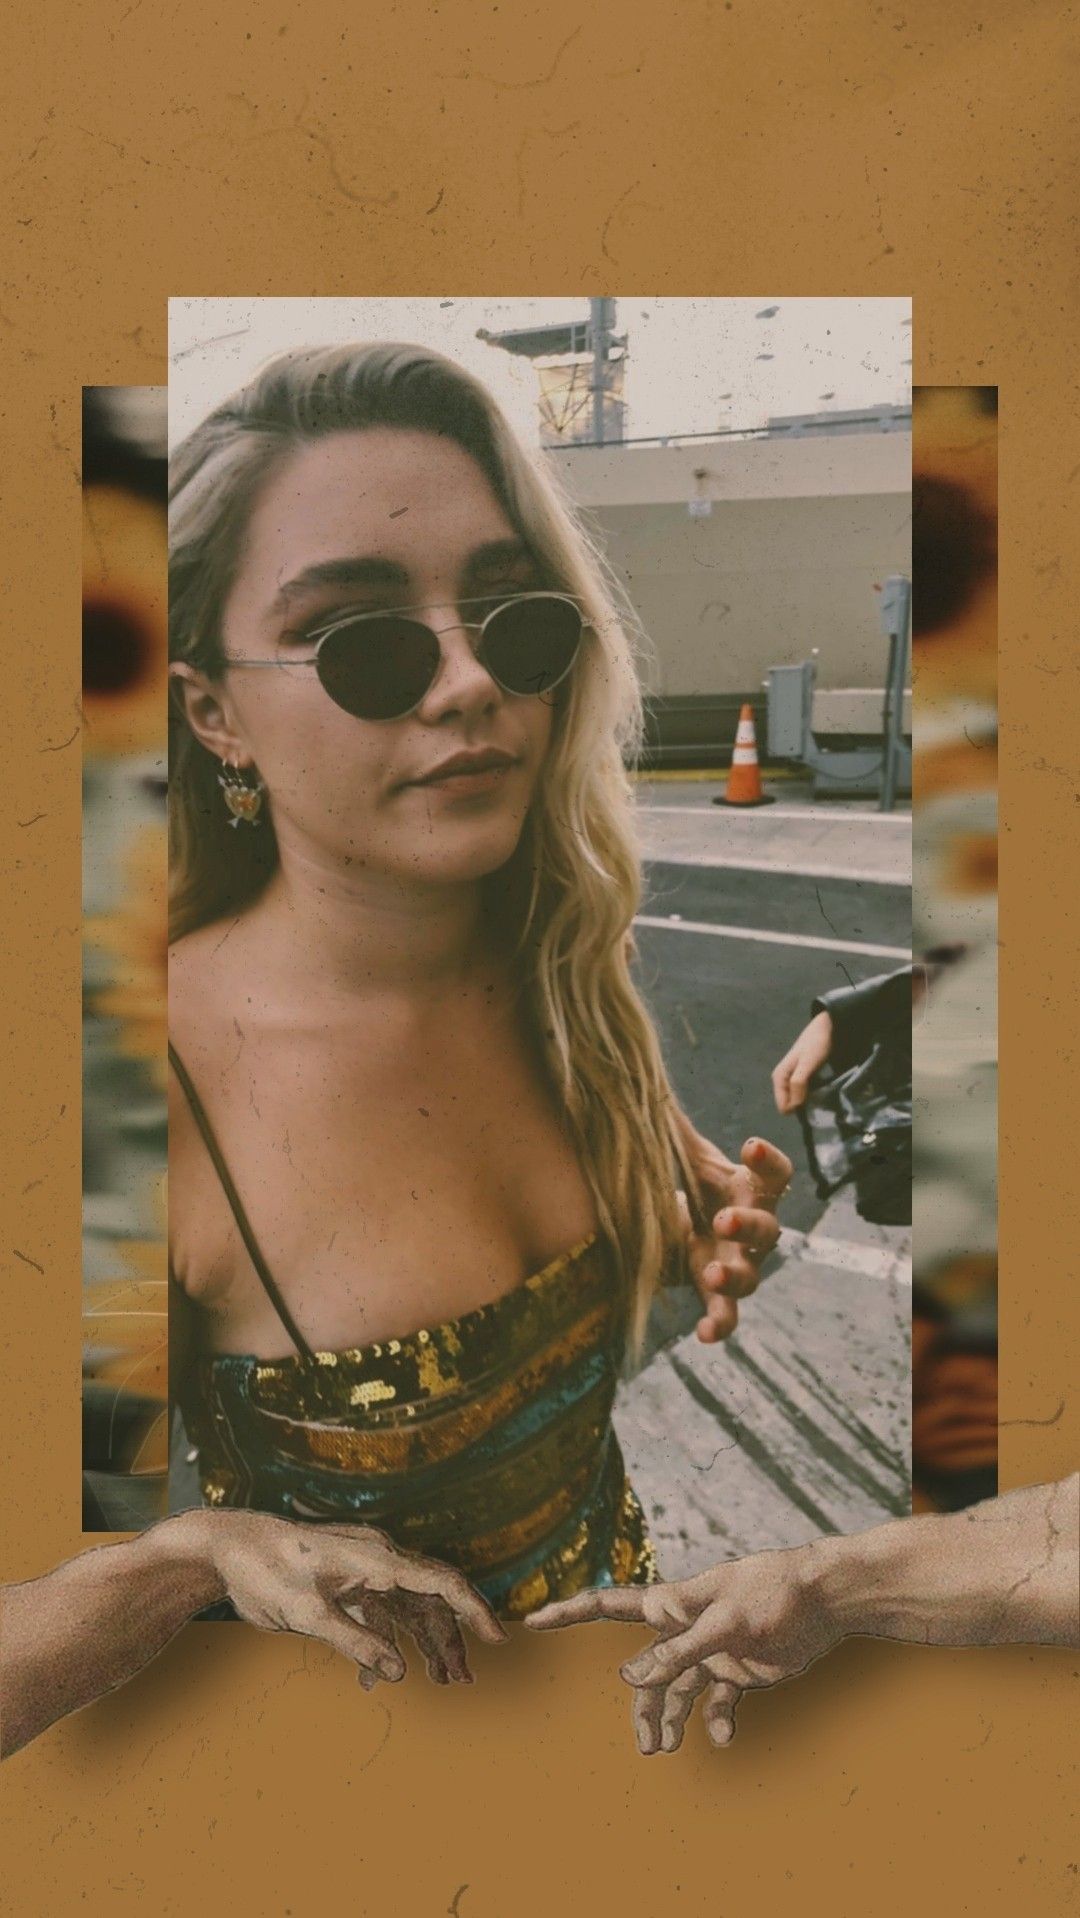 IPhone wallpaper of a blonde girl wearing sunglasses and a gold dress - Florence Pugh